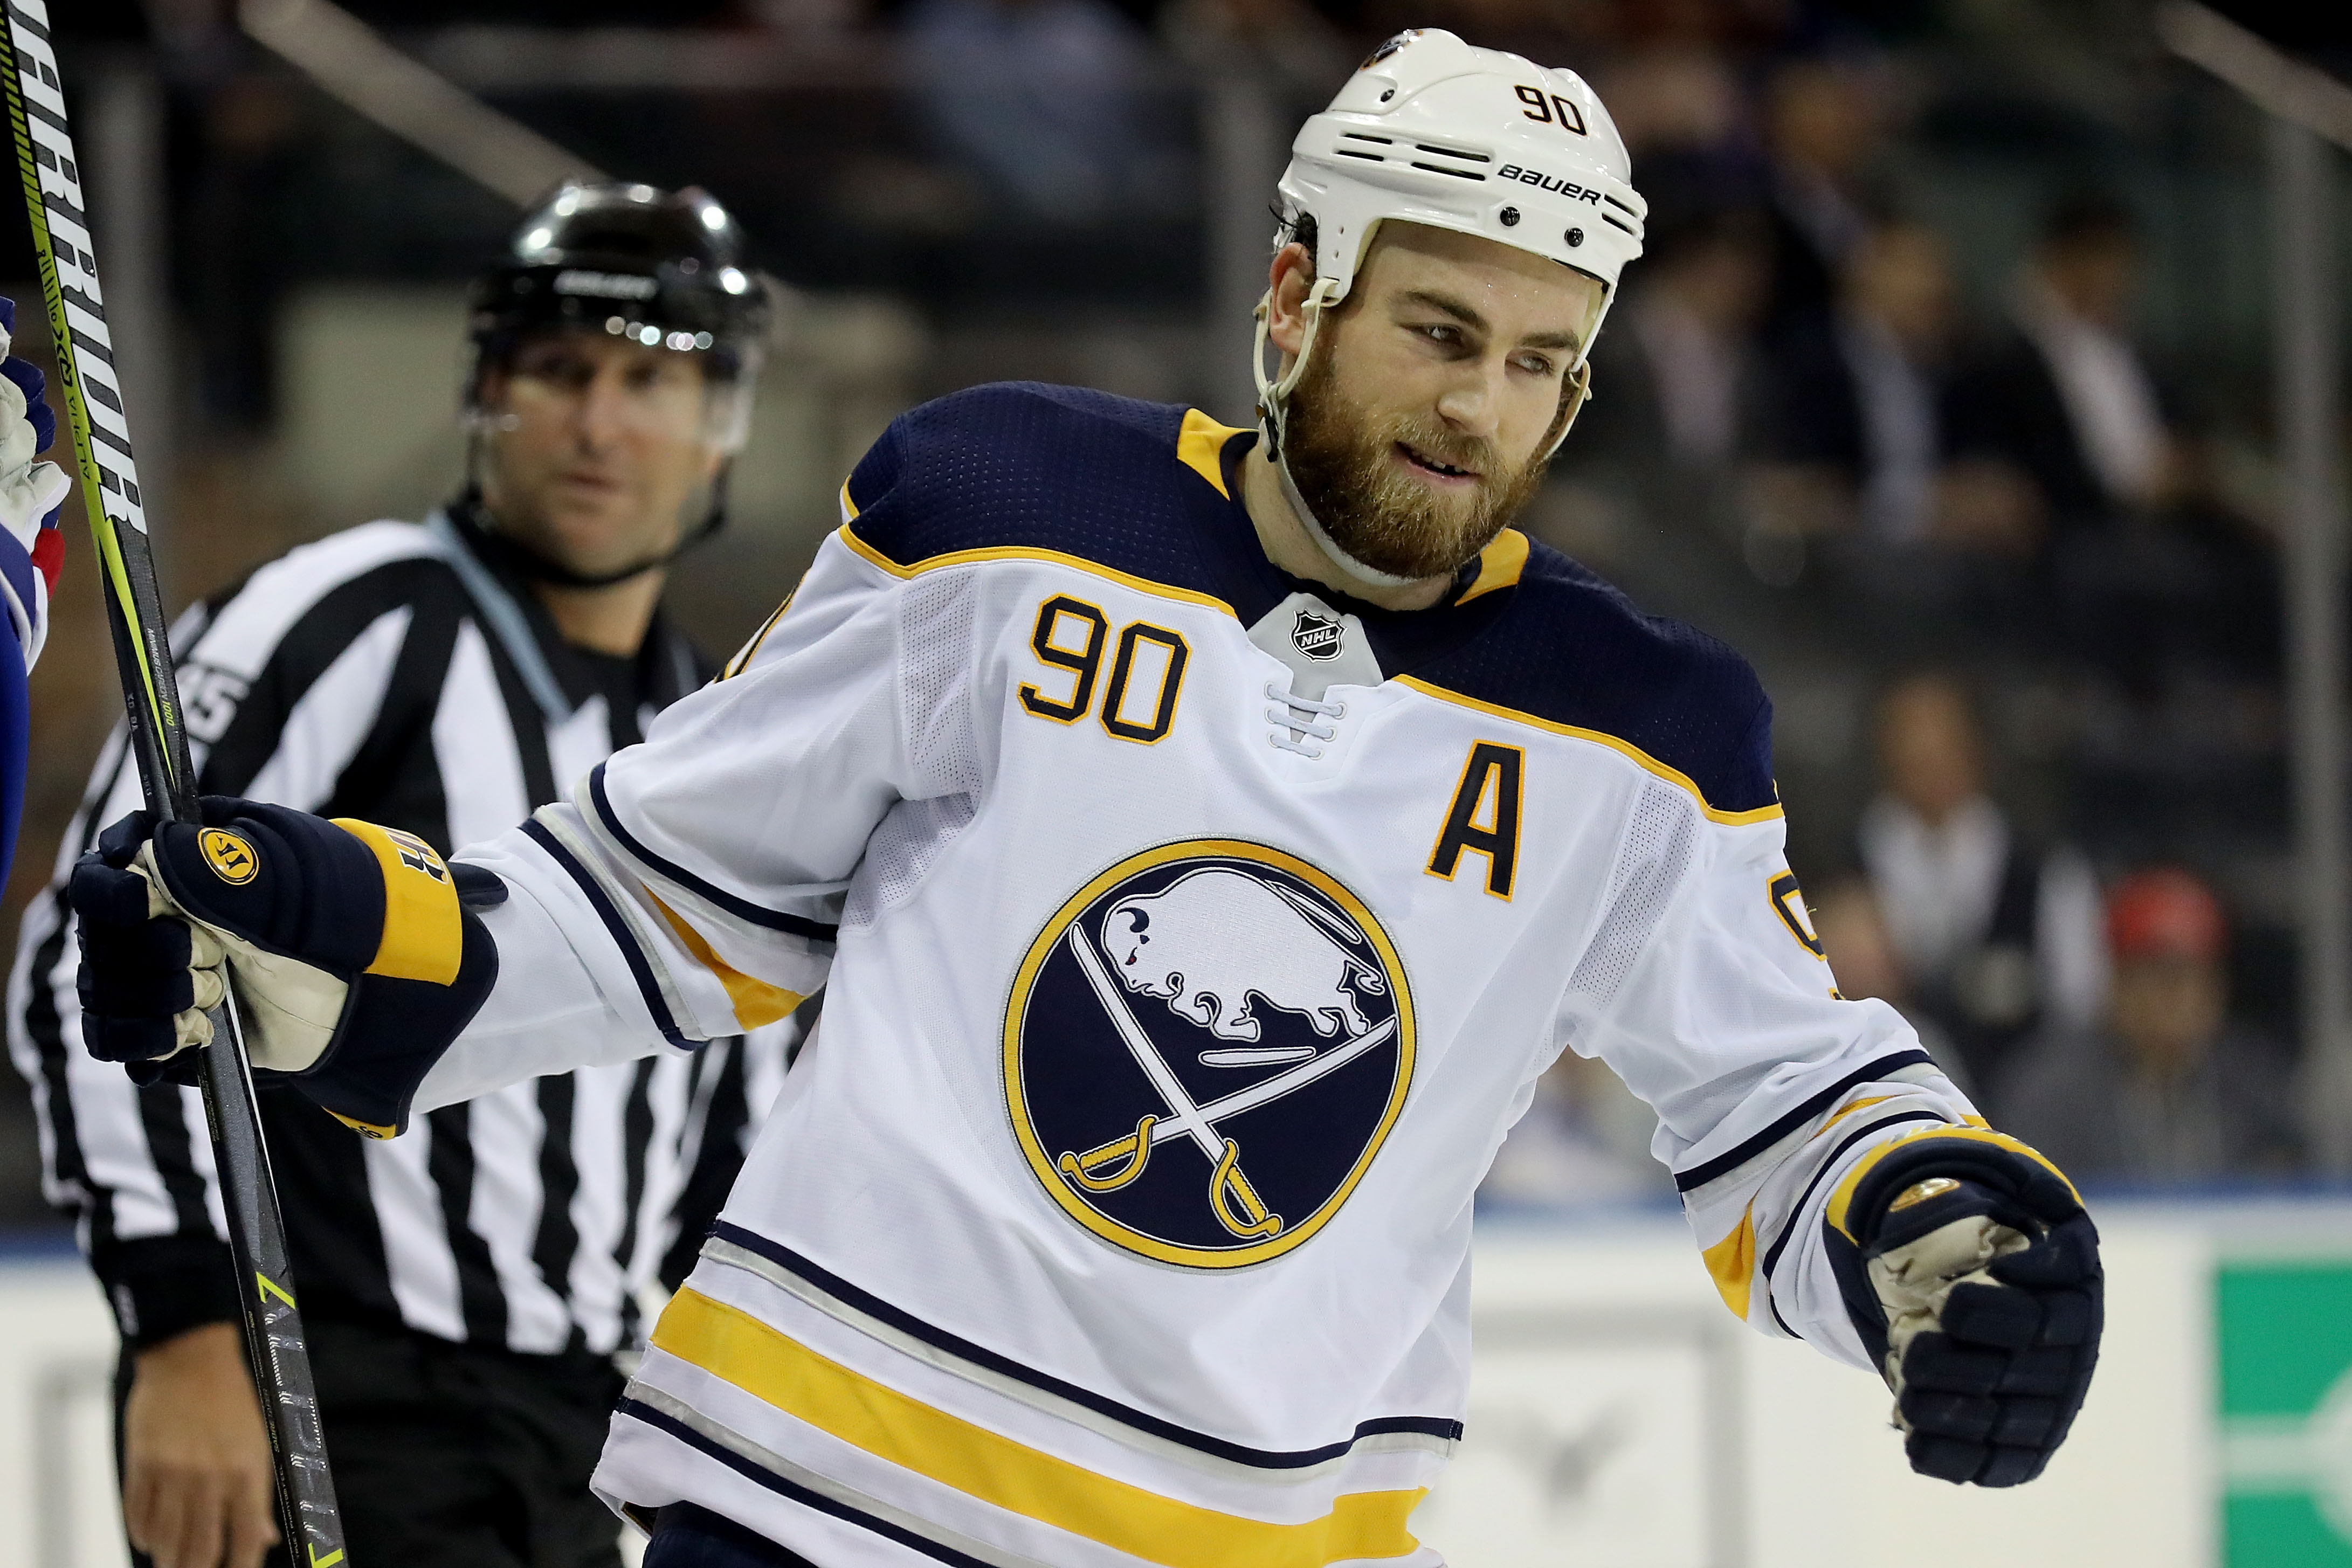 Sabres' Ryan O'Reilly selected for NHL All-Star Game - Buffalo